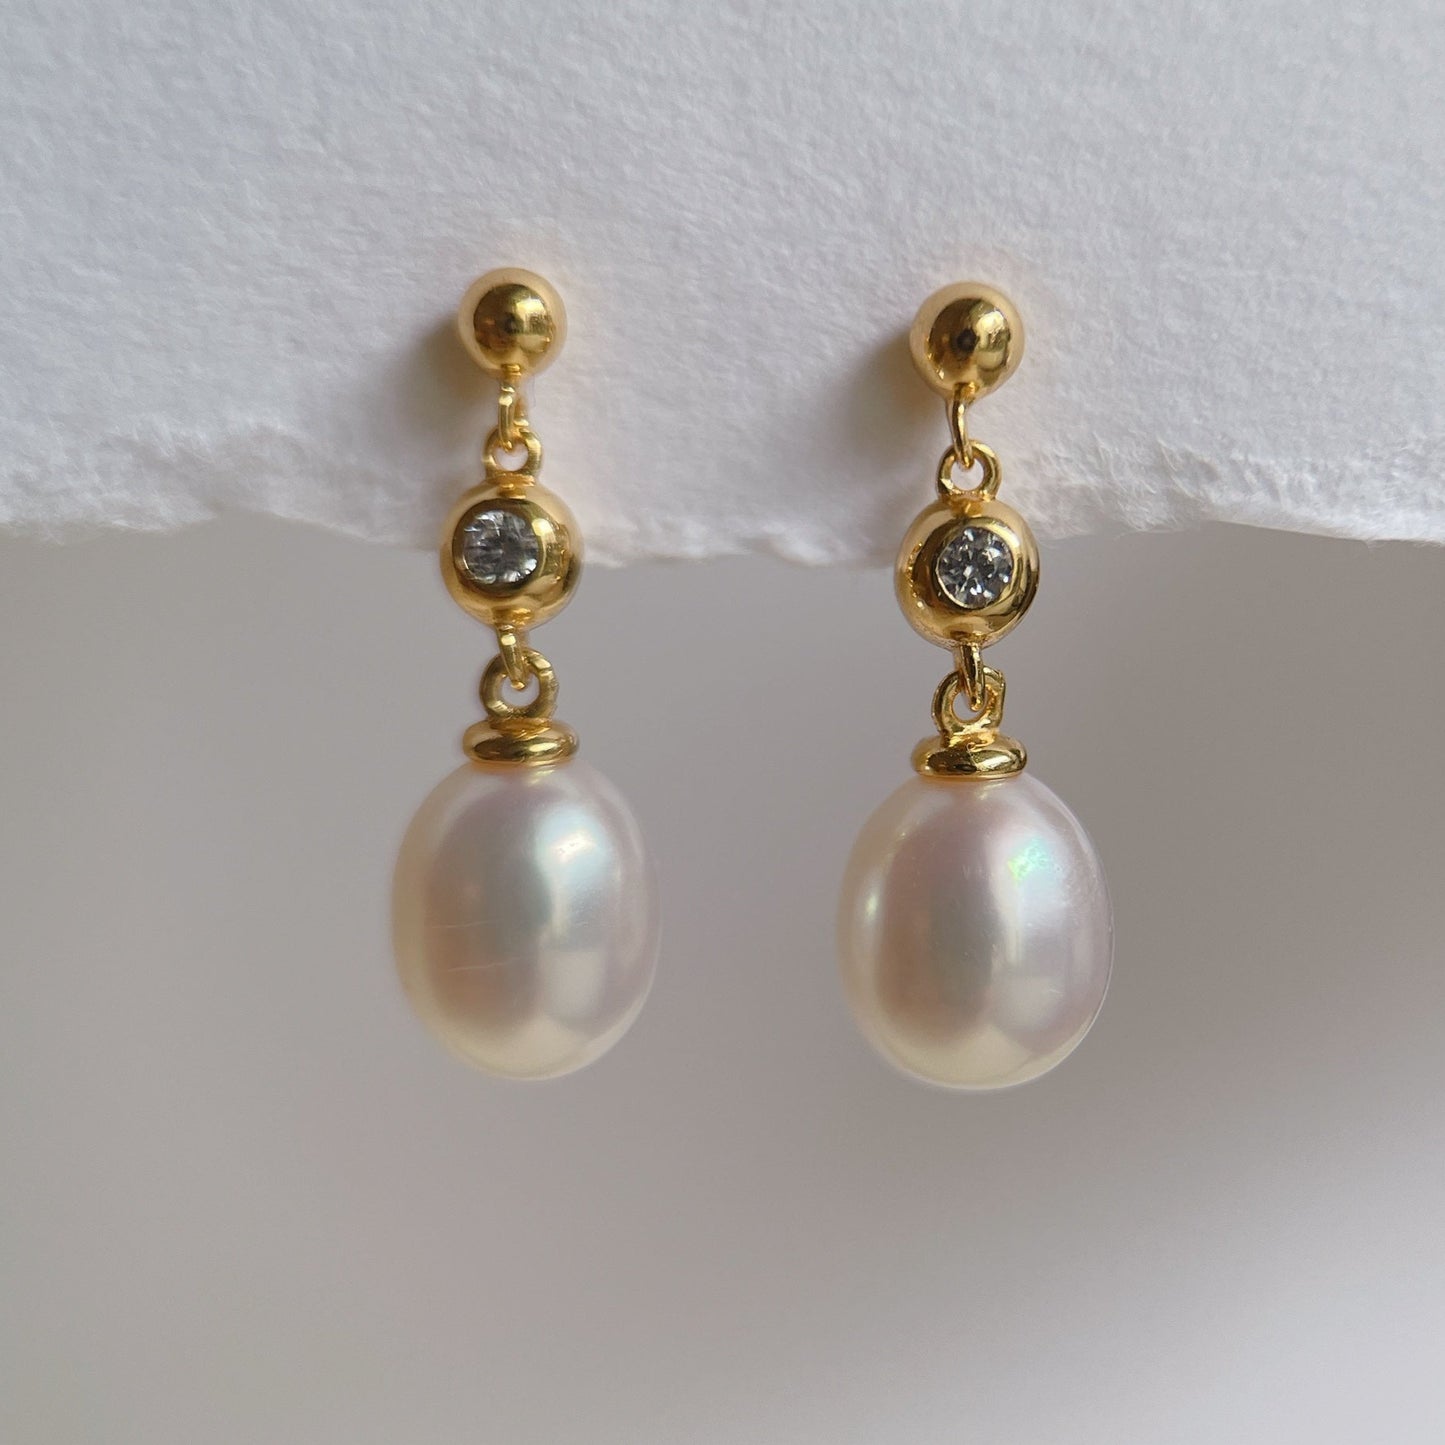 Yellow Gold Plated Sterling Silver Freshwater Pearl Earrings, ER29